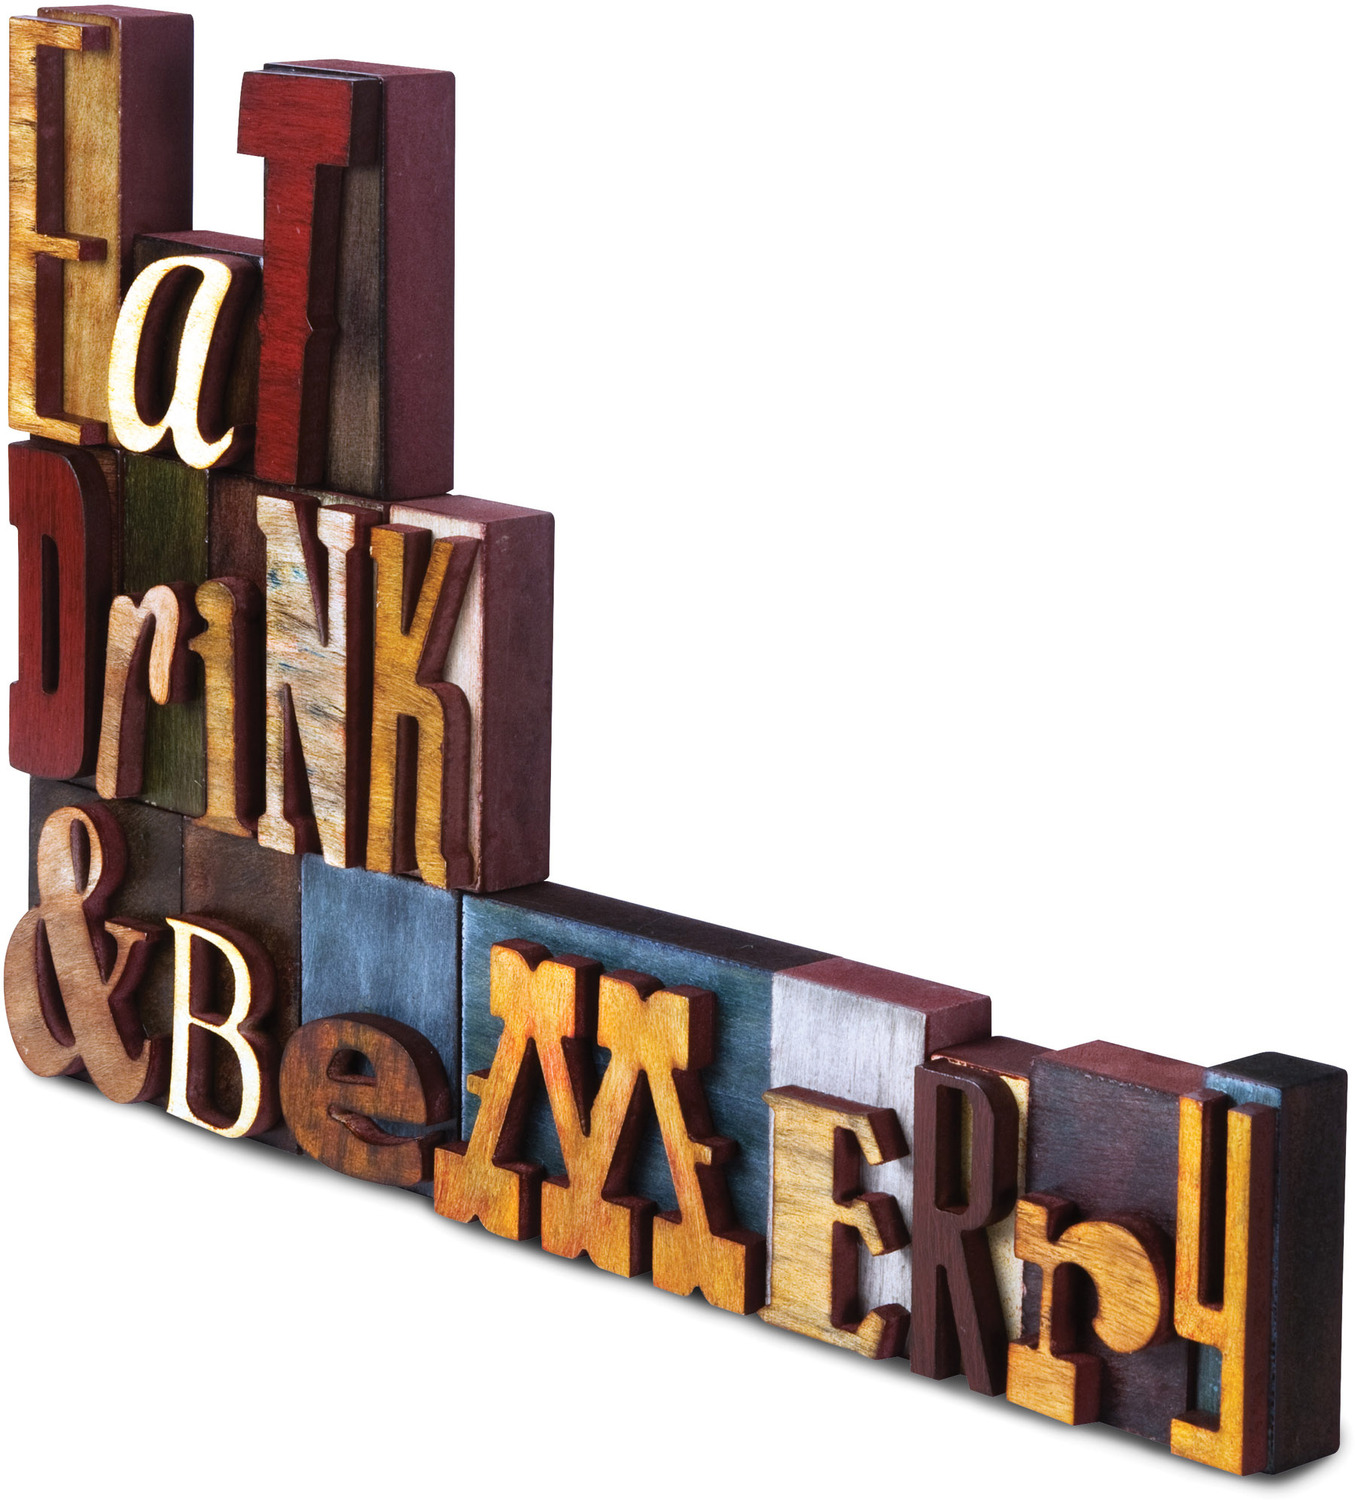 Eat, Drink & Be Merry by Wine All The Time - Eat, Drink & Be Merry - 18" x 12" Wood Block Letters